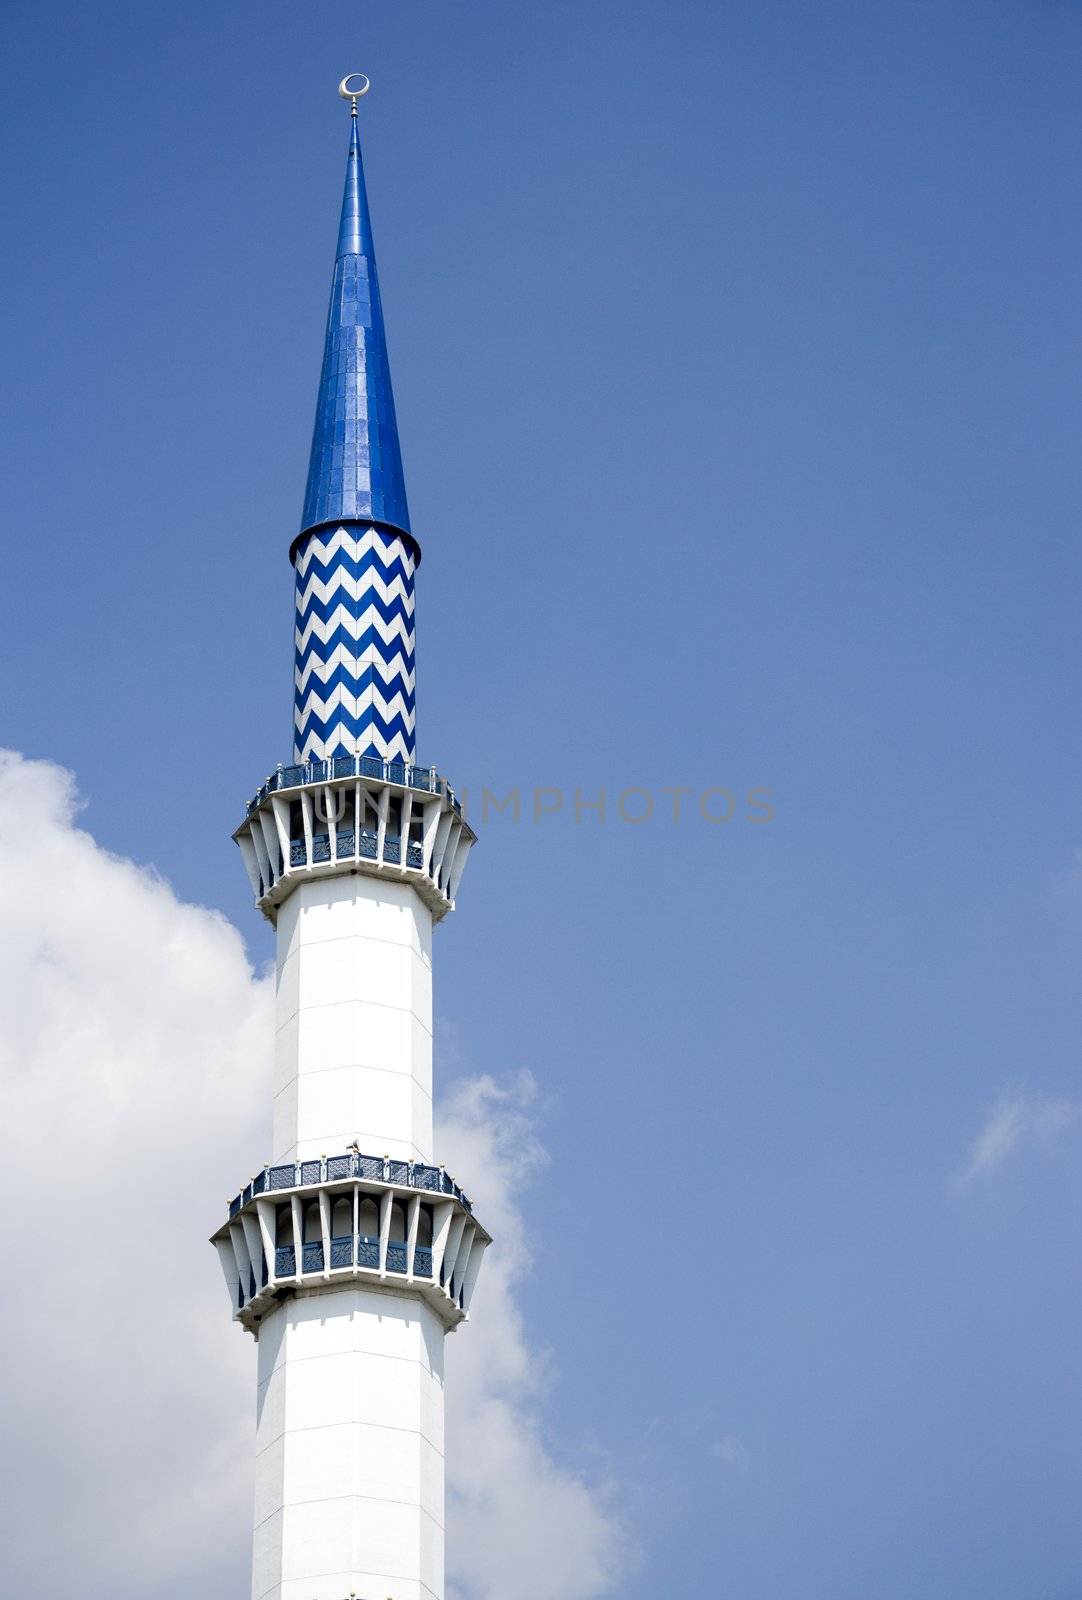 Minaret of the Sultan Salahuddin Abdul Aziz Shah Mosque or commonly known as the Blue Mosque, located at Shah Alam, Selangor, Malaysia.